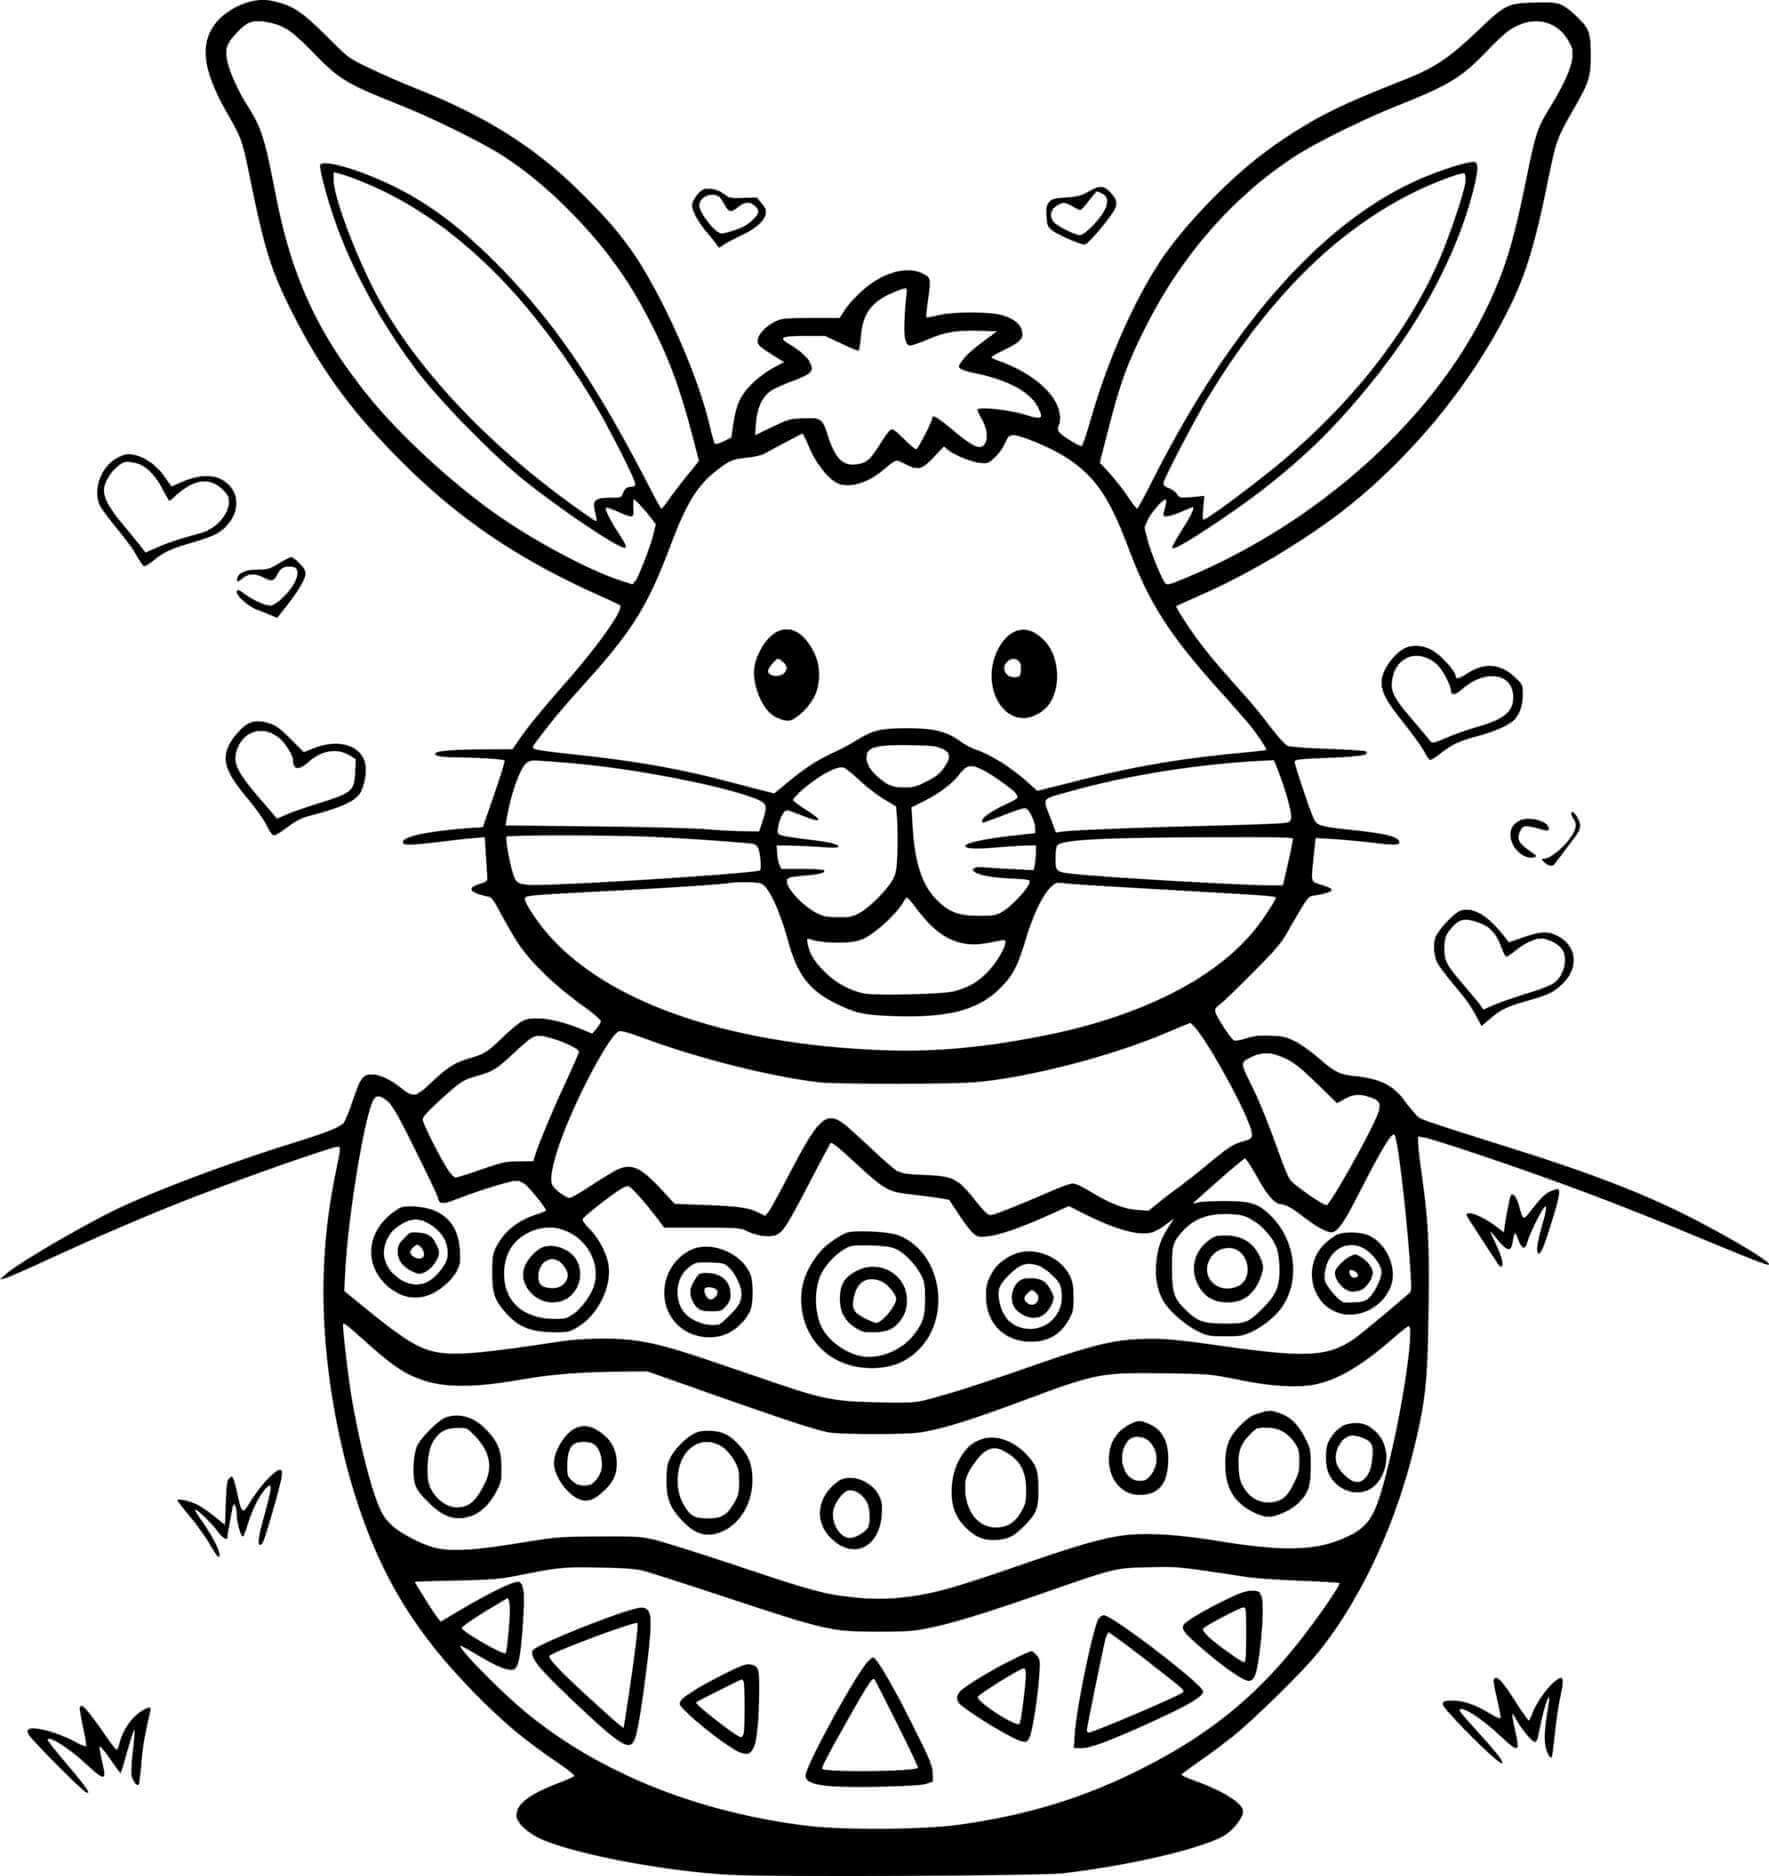 Blankly Bunny In The Easter Egg Coloring Page